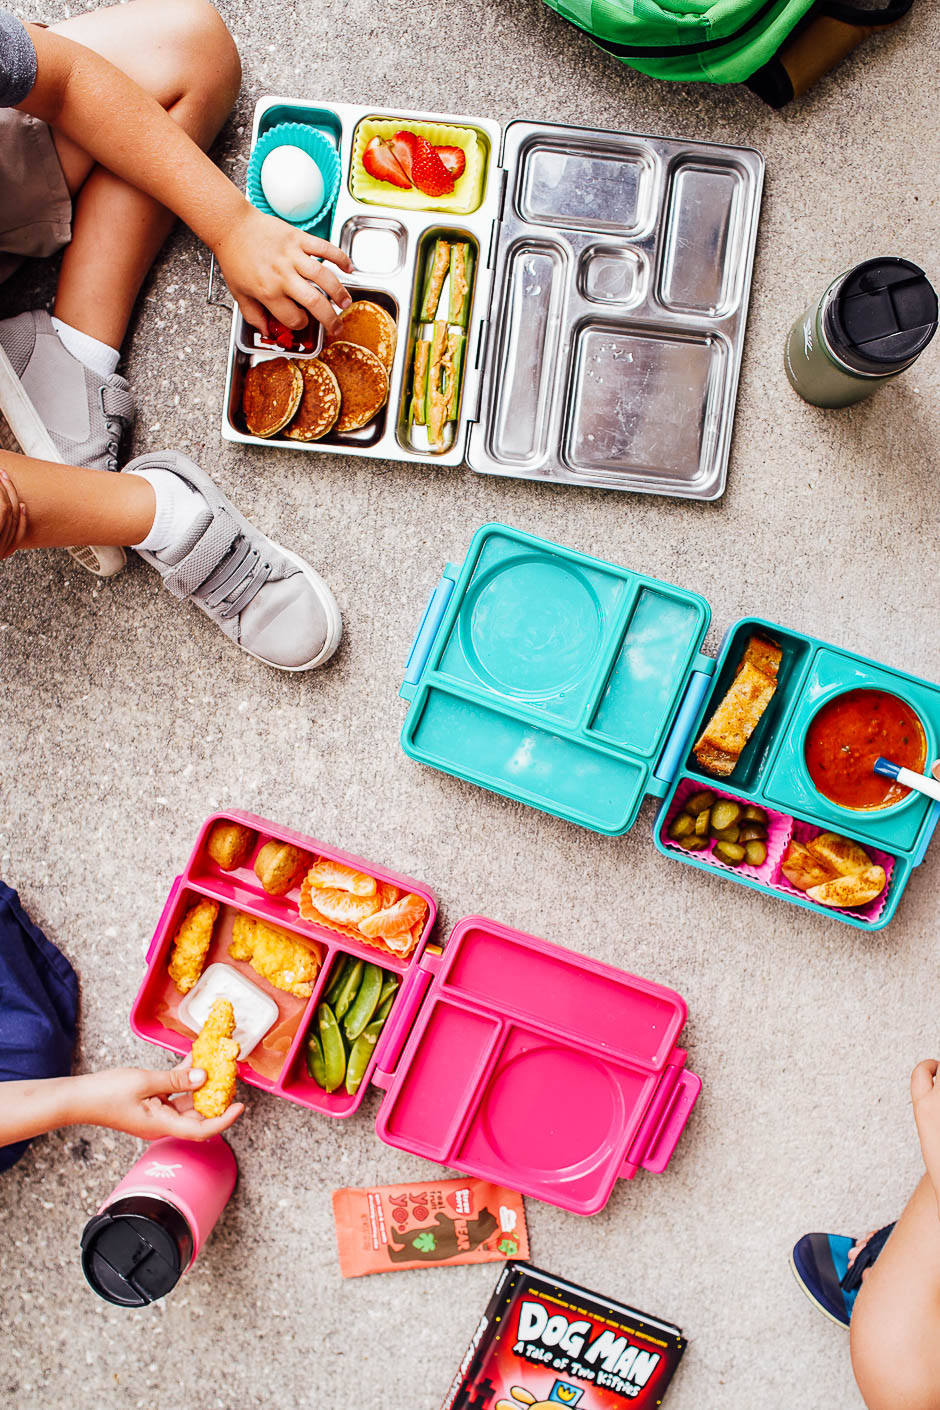 How to Keep Lunch Warm or Cold in The Lunchbox